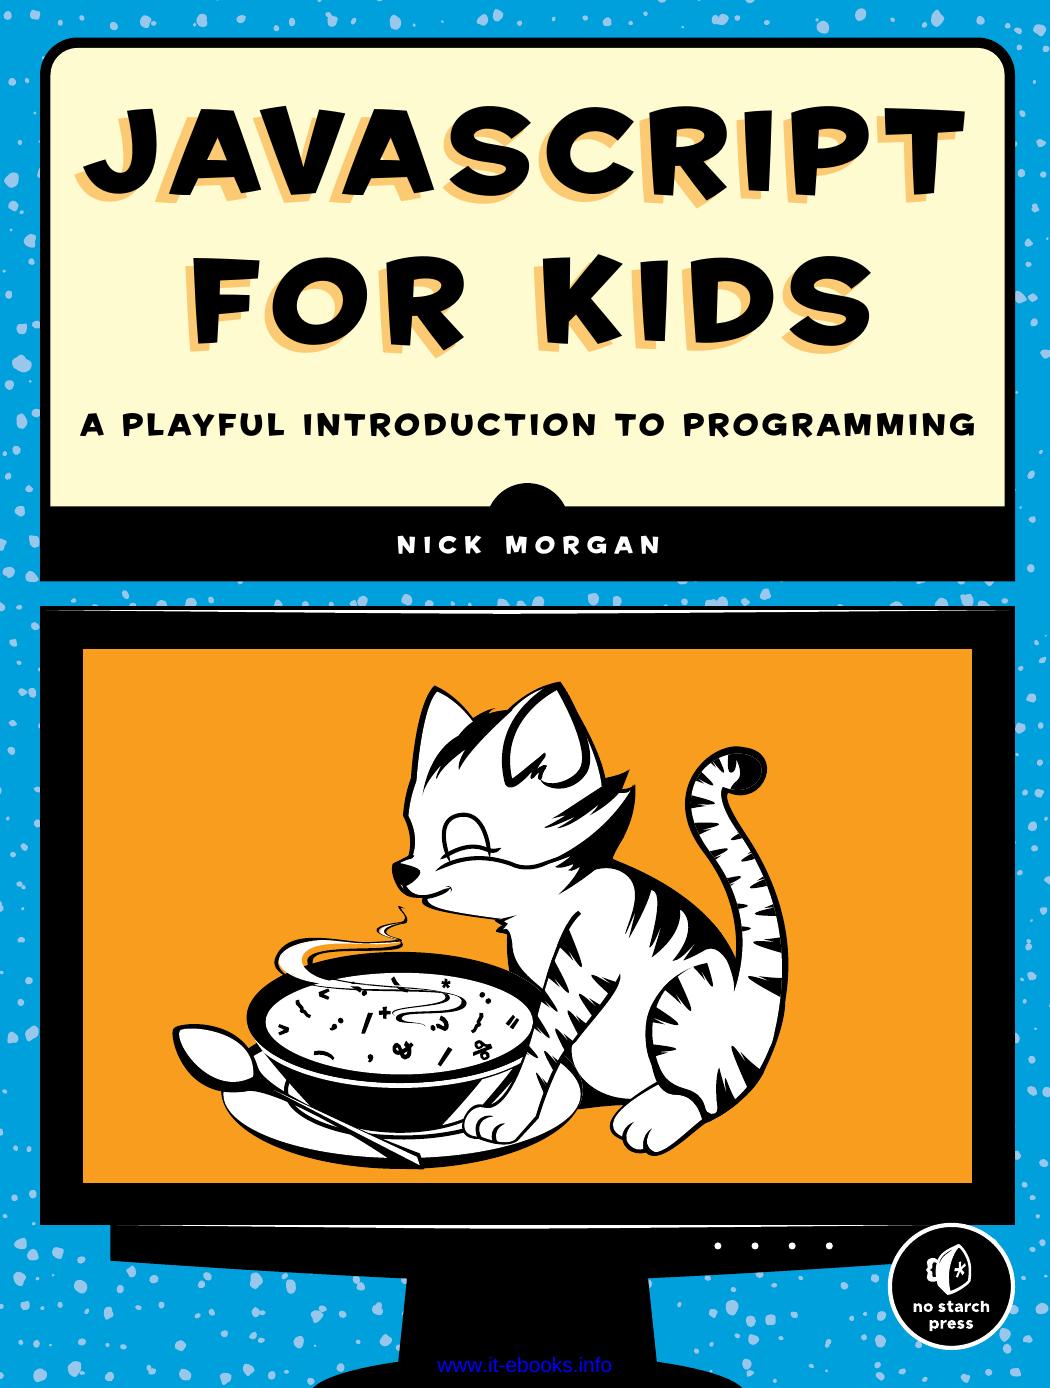 JavaScript for Kids: A Playful Introduction to Programming by Nick Morgan